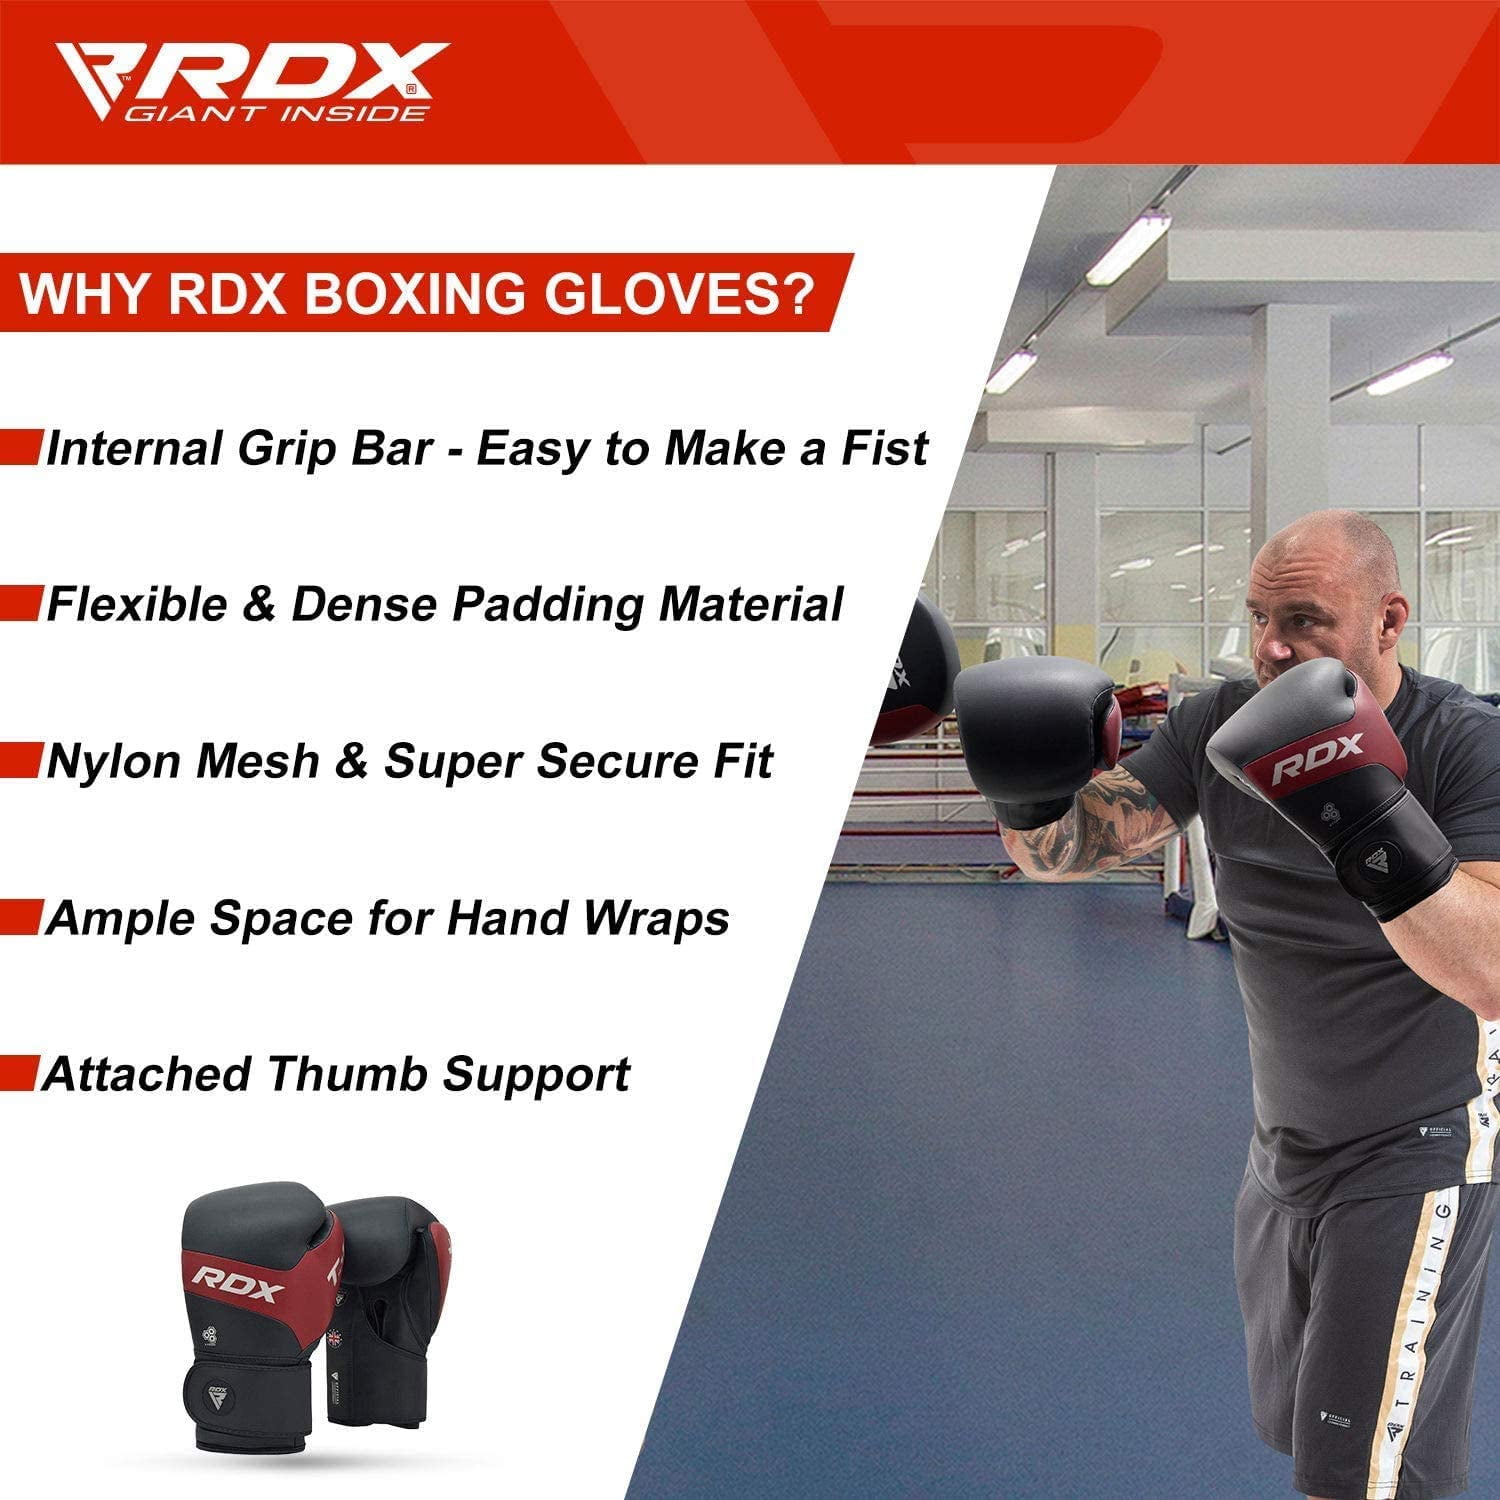 Ventilated Palm Pro Training Sparring RDX Boxing Gloves Heavy Punching Bag Focus Mitts Pads Workout Men Women Adult 8 10 12 14 16 Oz Maya Hide Leather Muay Thai MMA Kickboxing Multi Layered 